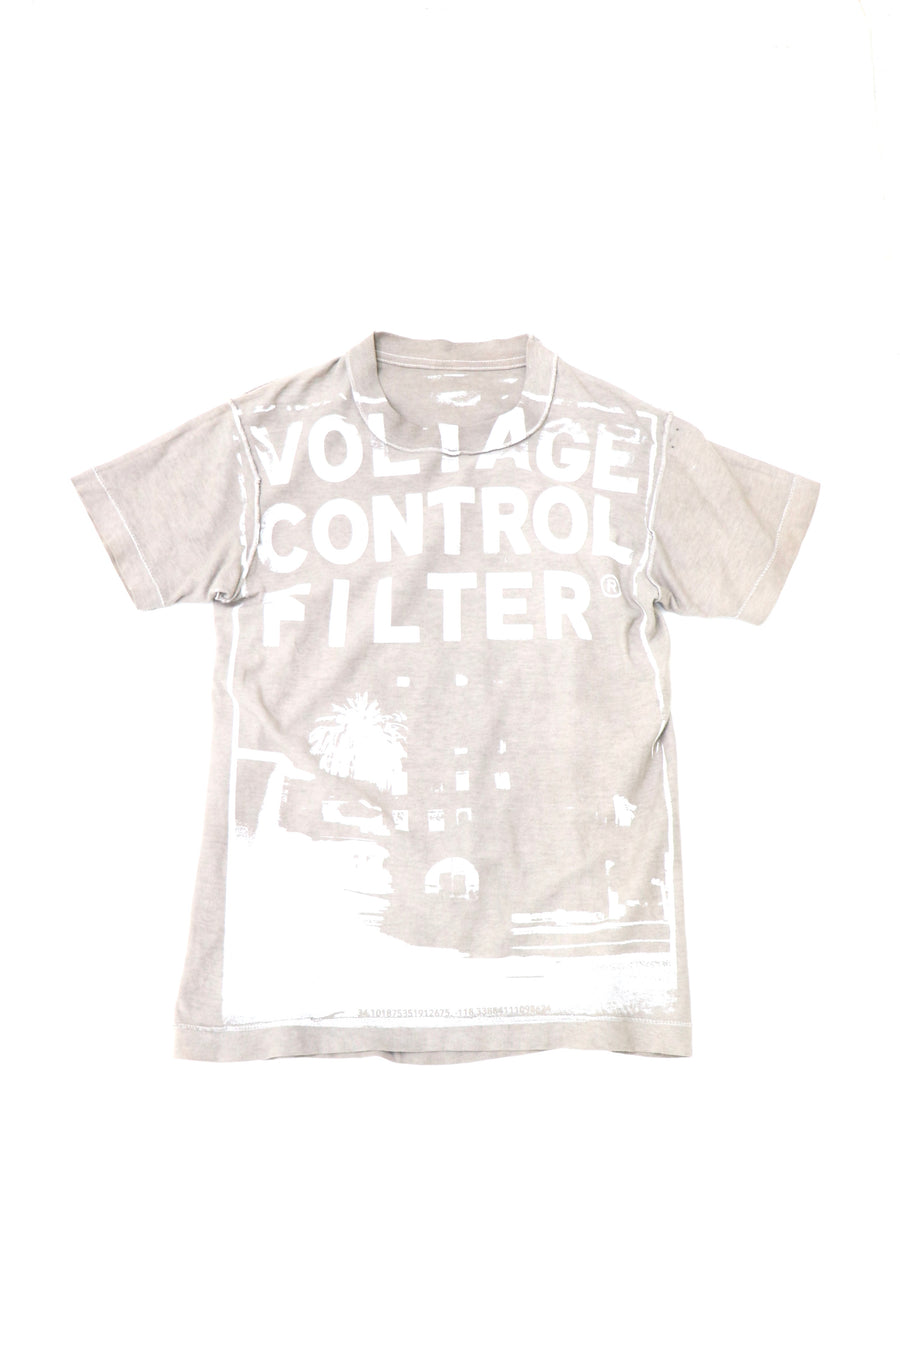 Voltage Control Filter × P.A.A  ONE&ONLY USED PRINT T-12